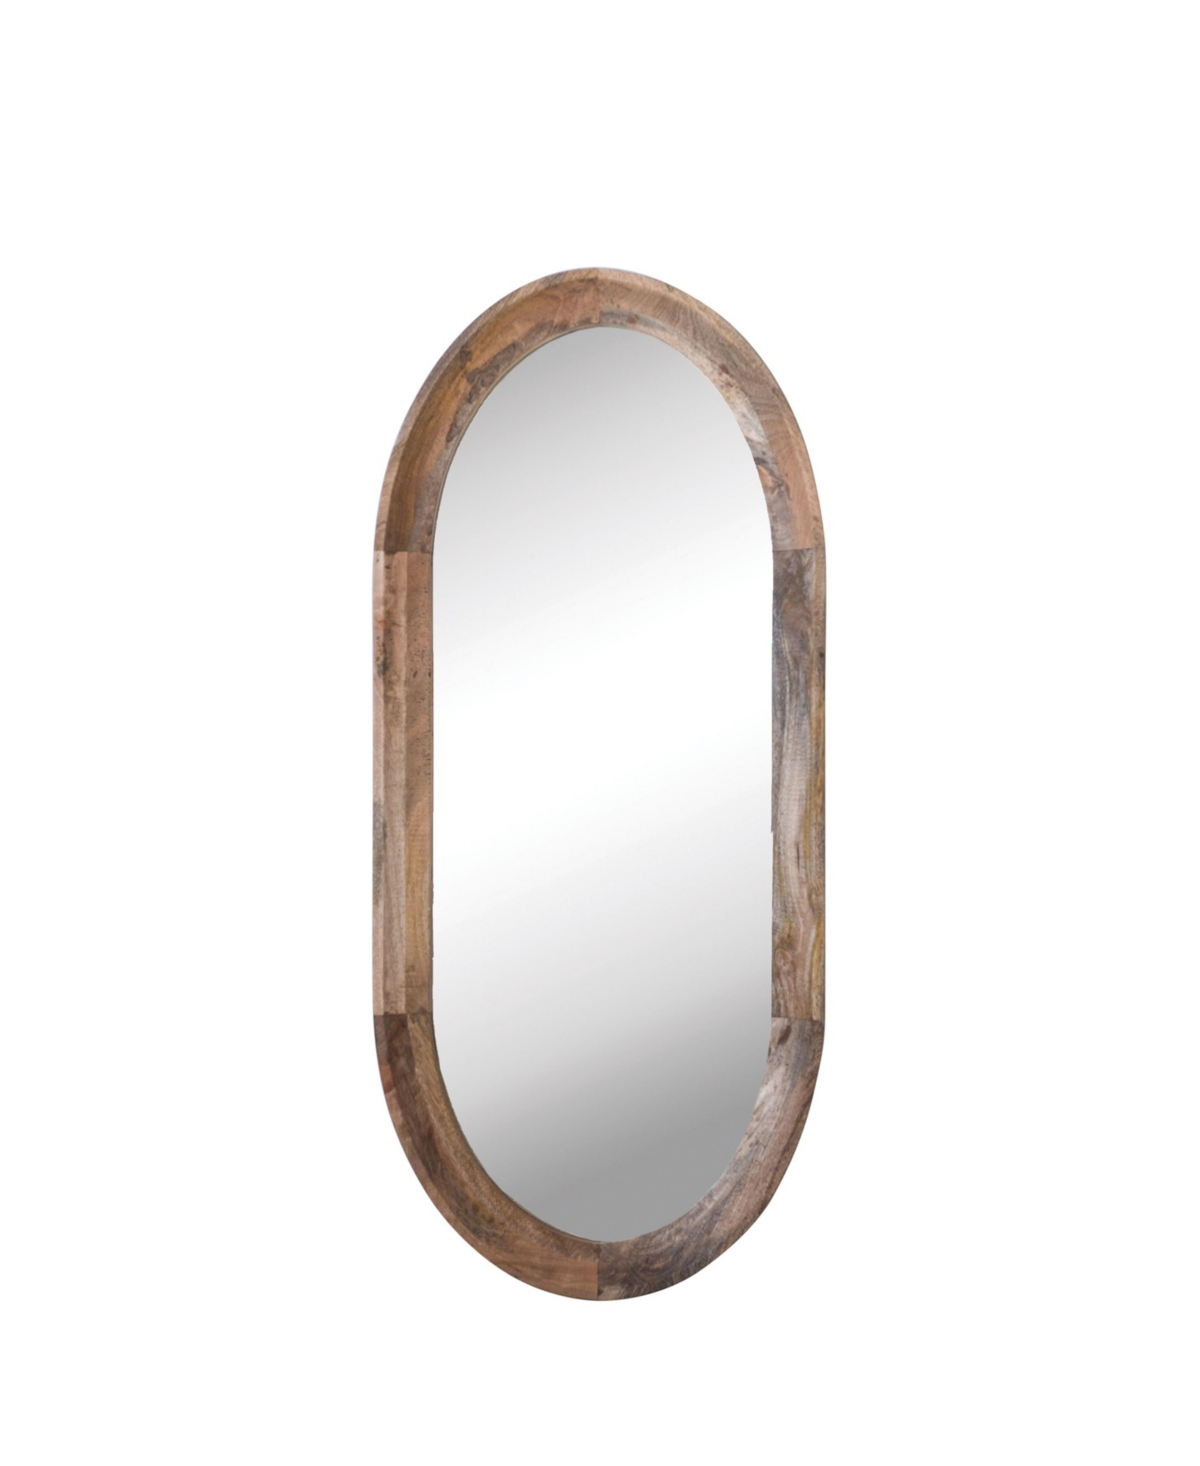 Oval Wood Framed Wall Mirror, Natural - Brown